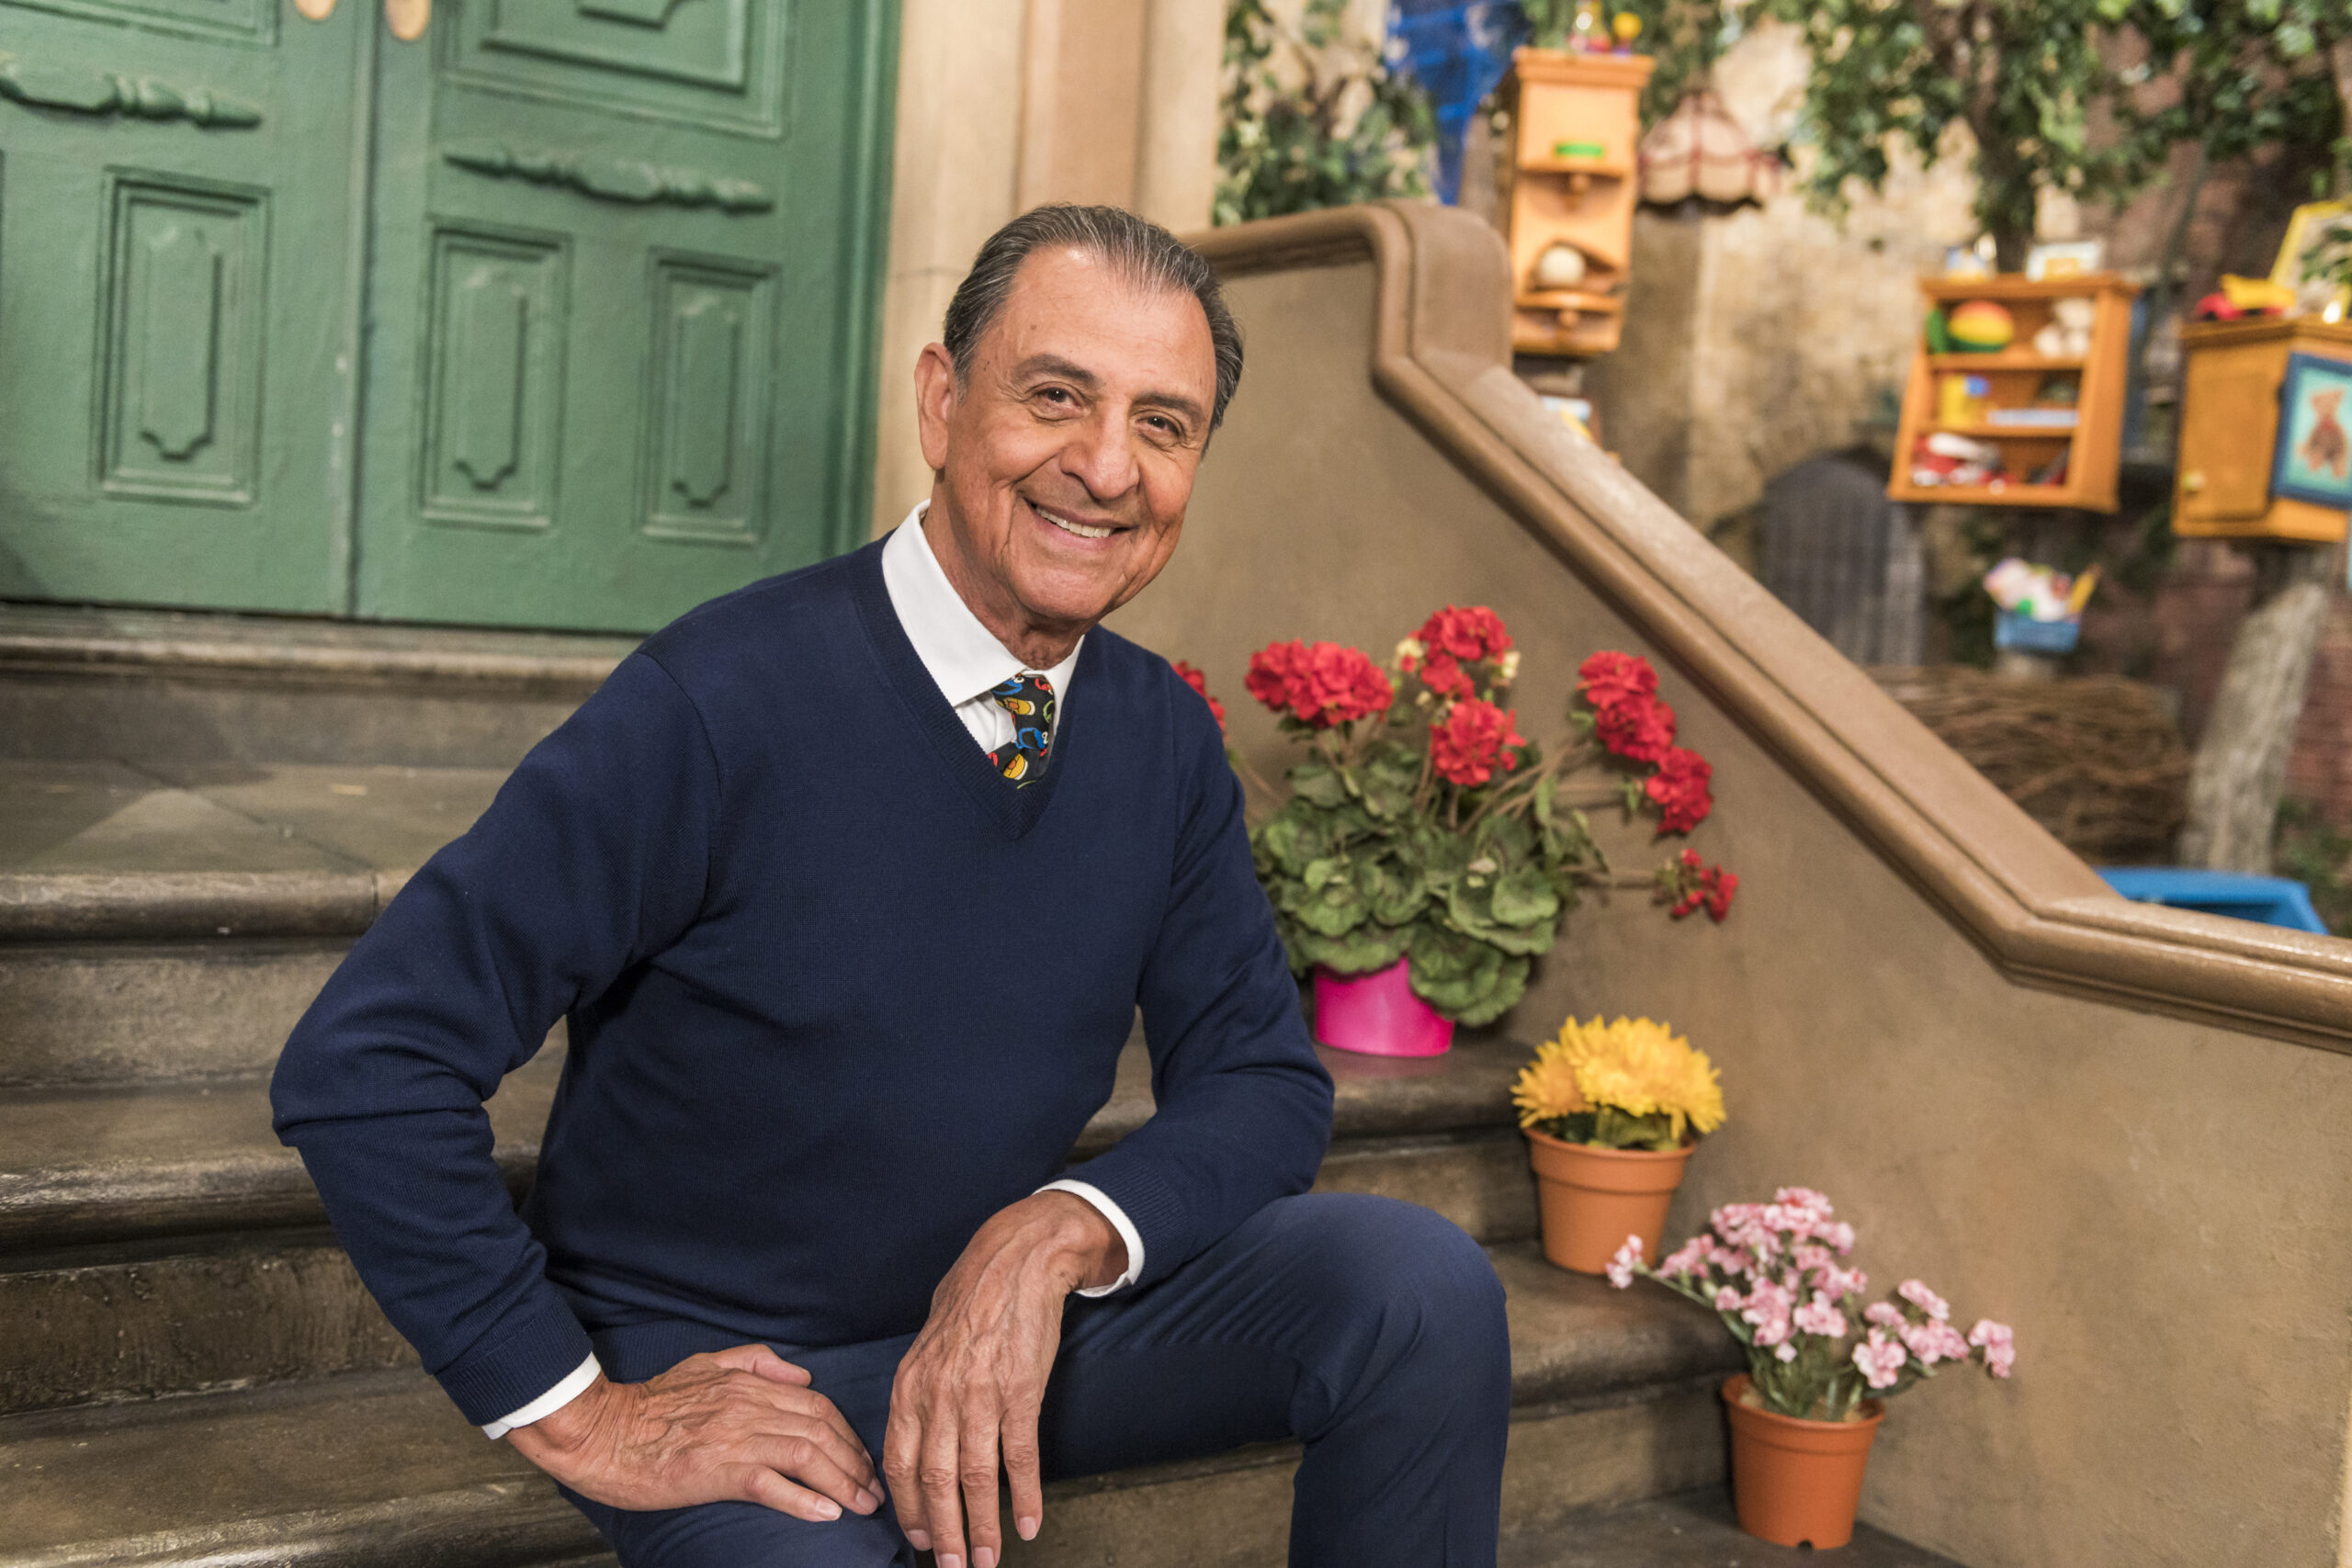 In this photo provided by Sesame Workshop, Emilio Delgado poses for a picture at Kaufman Astoria Studios while filming the 50th season of "Sesame Street," in October 2018. Delgado, the actor and singer who for 45 years was a warm and familiar presence in children's lives and a rare Latino face on American television as fix-it shop owner Luis on “Sesame Street,” died Thursday, March 10, 2022. He was 81. (Zach Hyman/Sesame Workshop via AP)